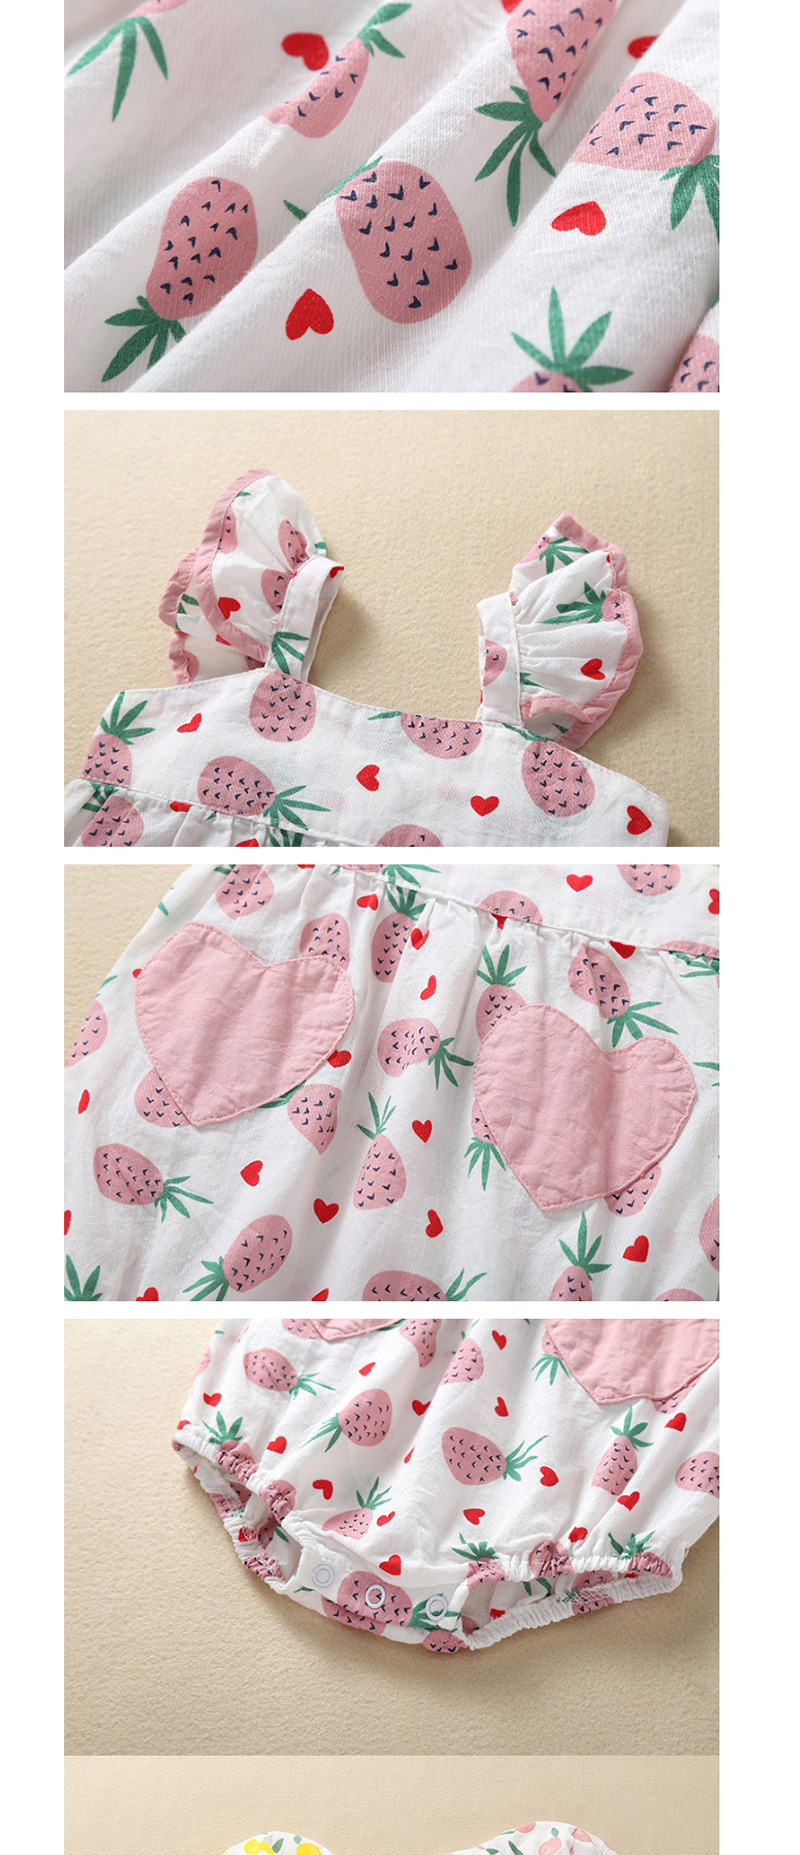 Fashion Red Strawberry Fruit Print Love Patch Pocket Baby Triangle Lace,Kids Clothing